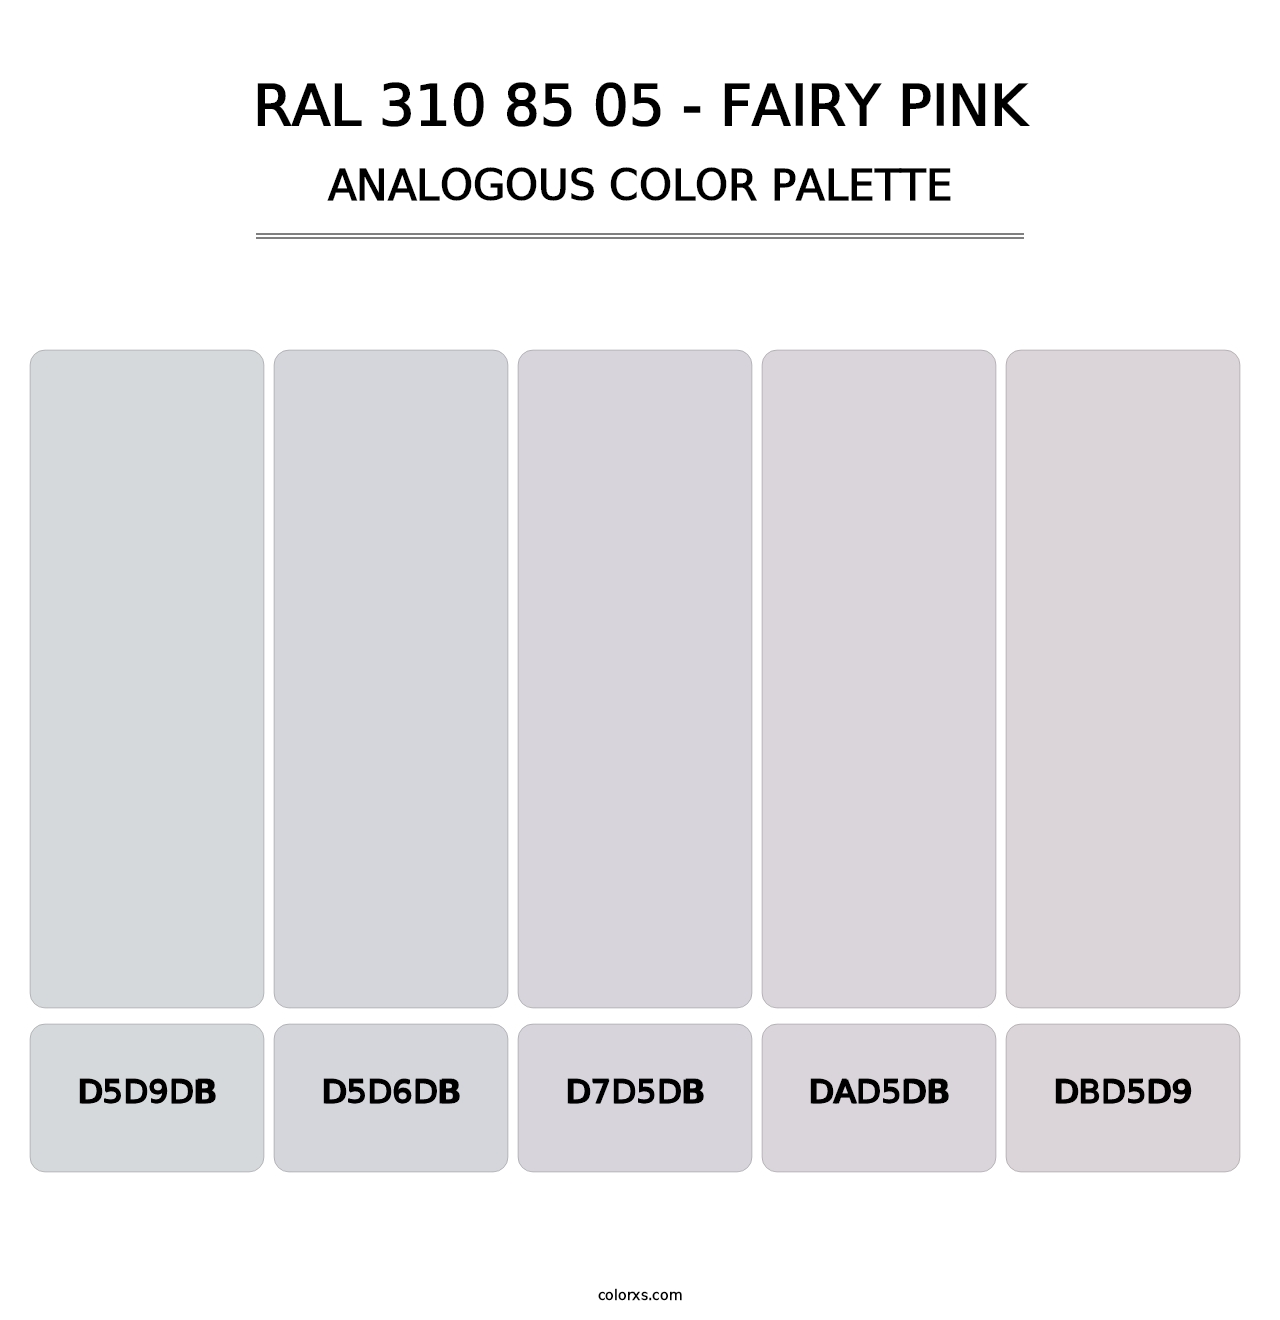 RAL 310 85 05 - Fairy Pink - Analogous Color Palette